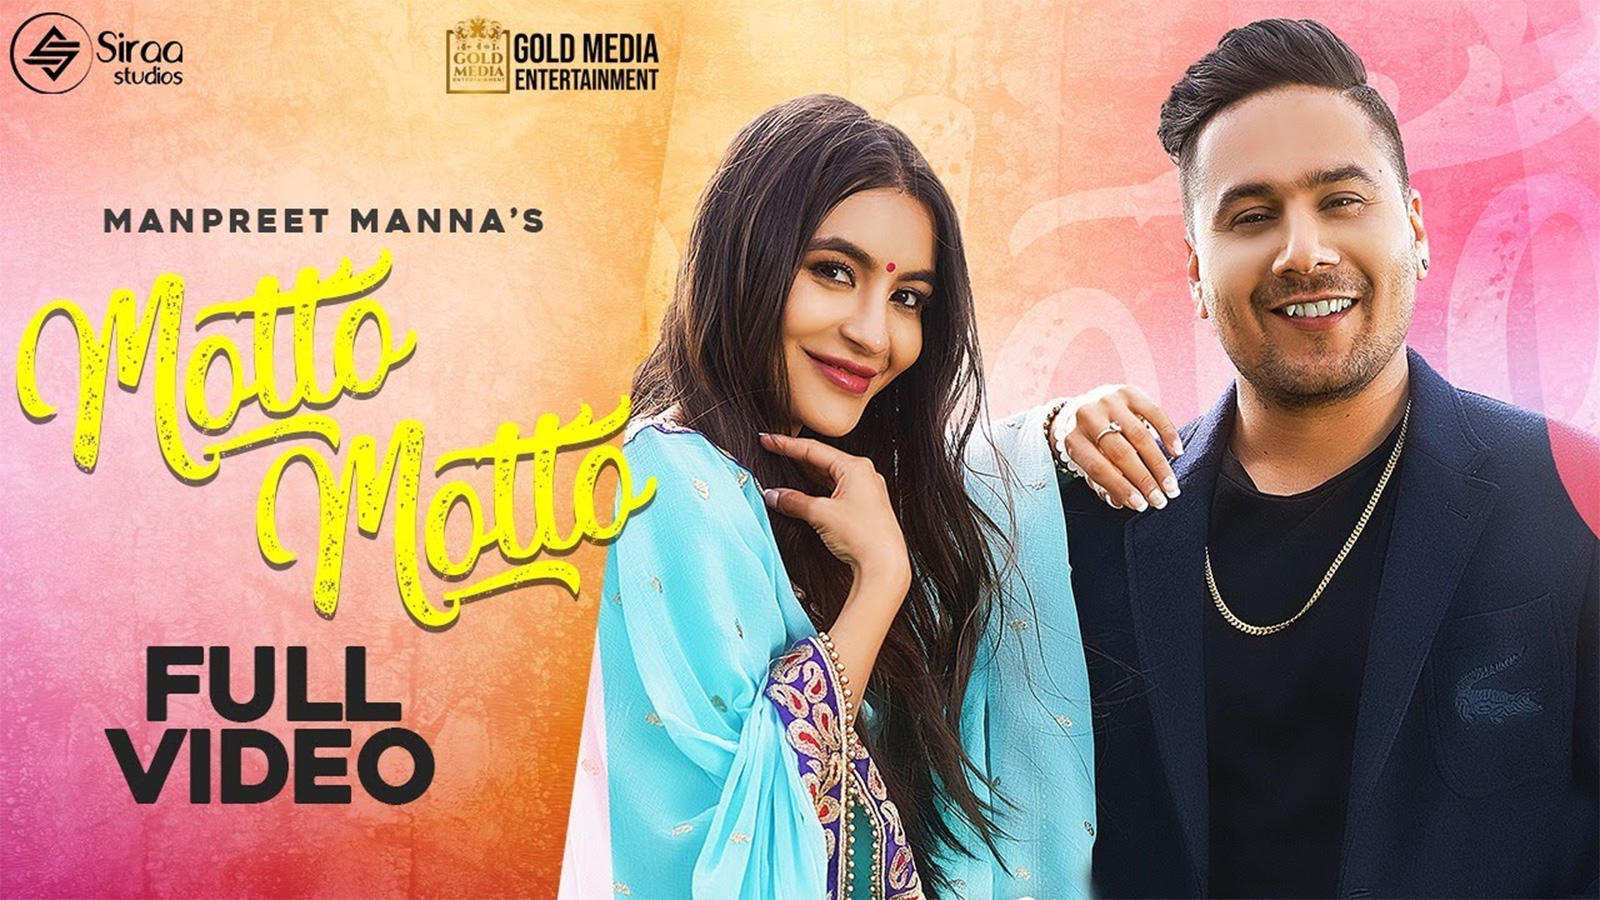 Check Out New Punjabi Trending Song Music Video - 'Motto Motto' Sung By  Manpreet Manna | Punjabi Video Songs - Times of India